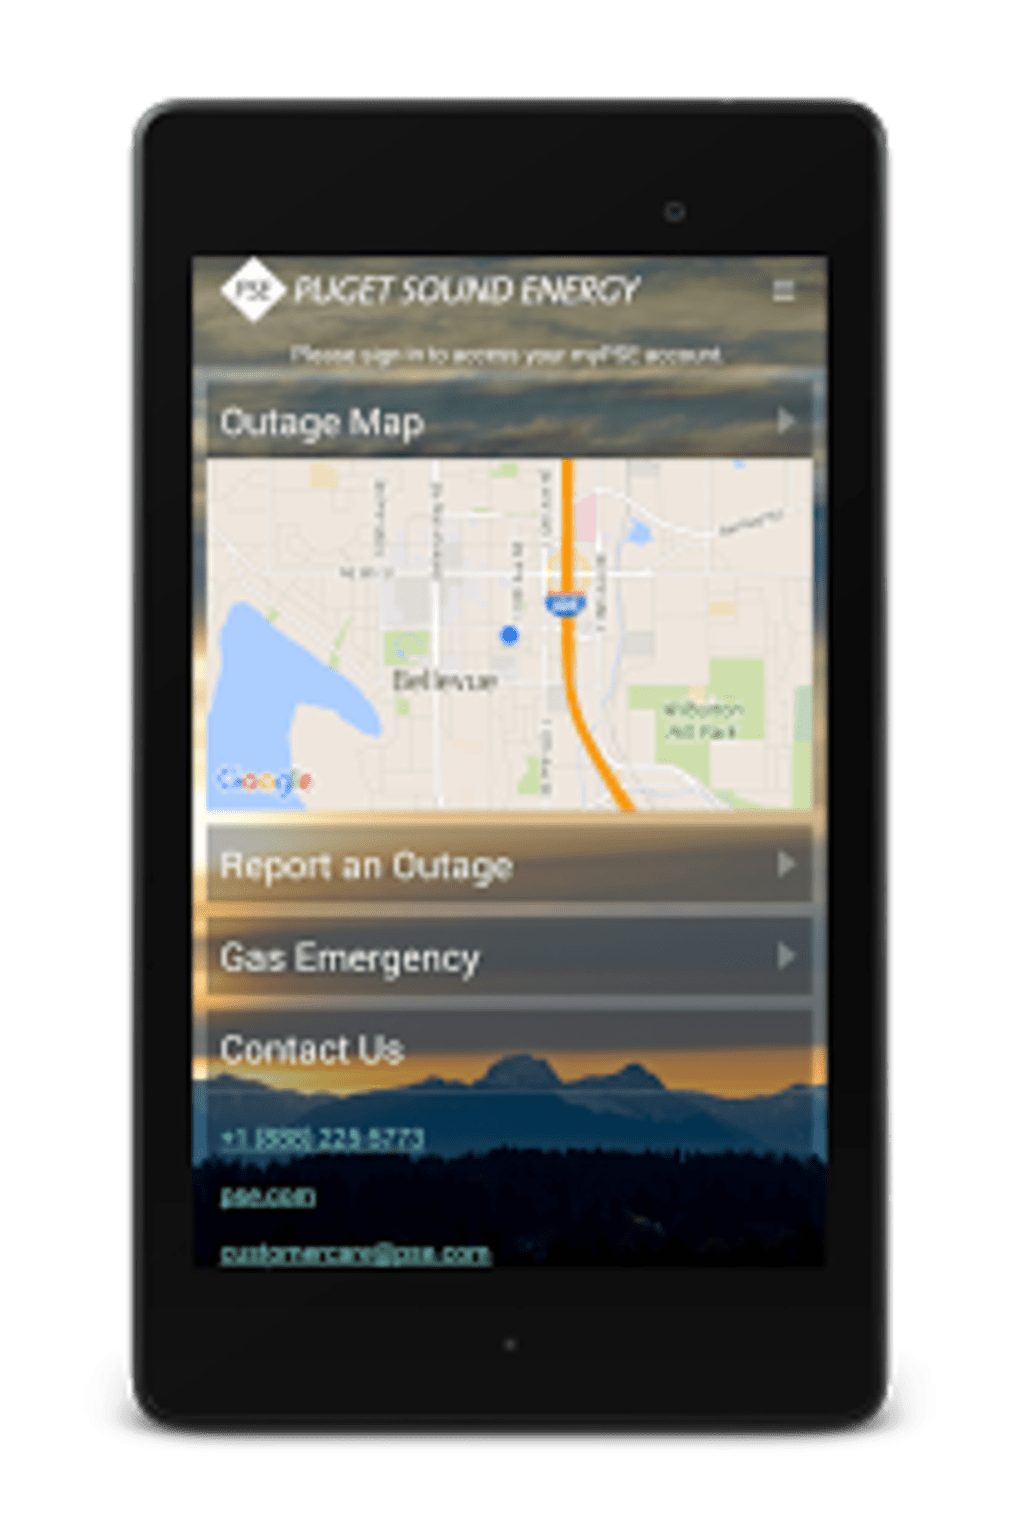 mypse-from-puget-sound-energy-android